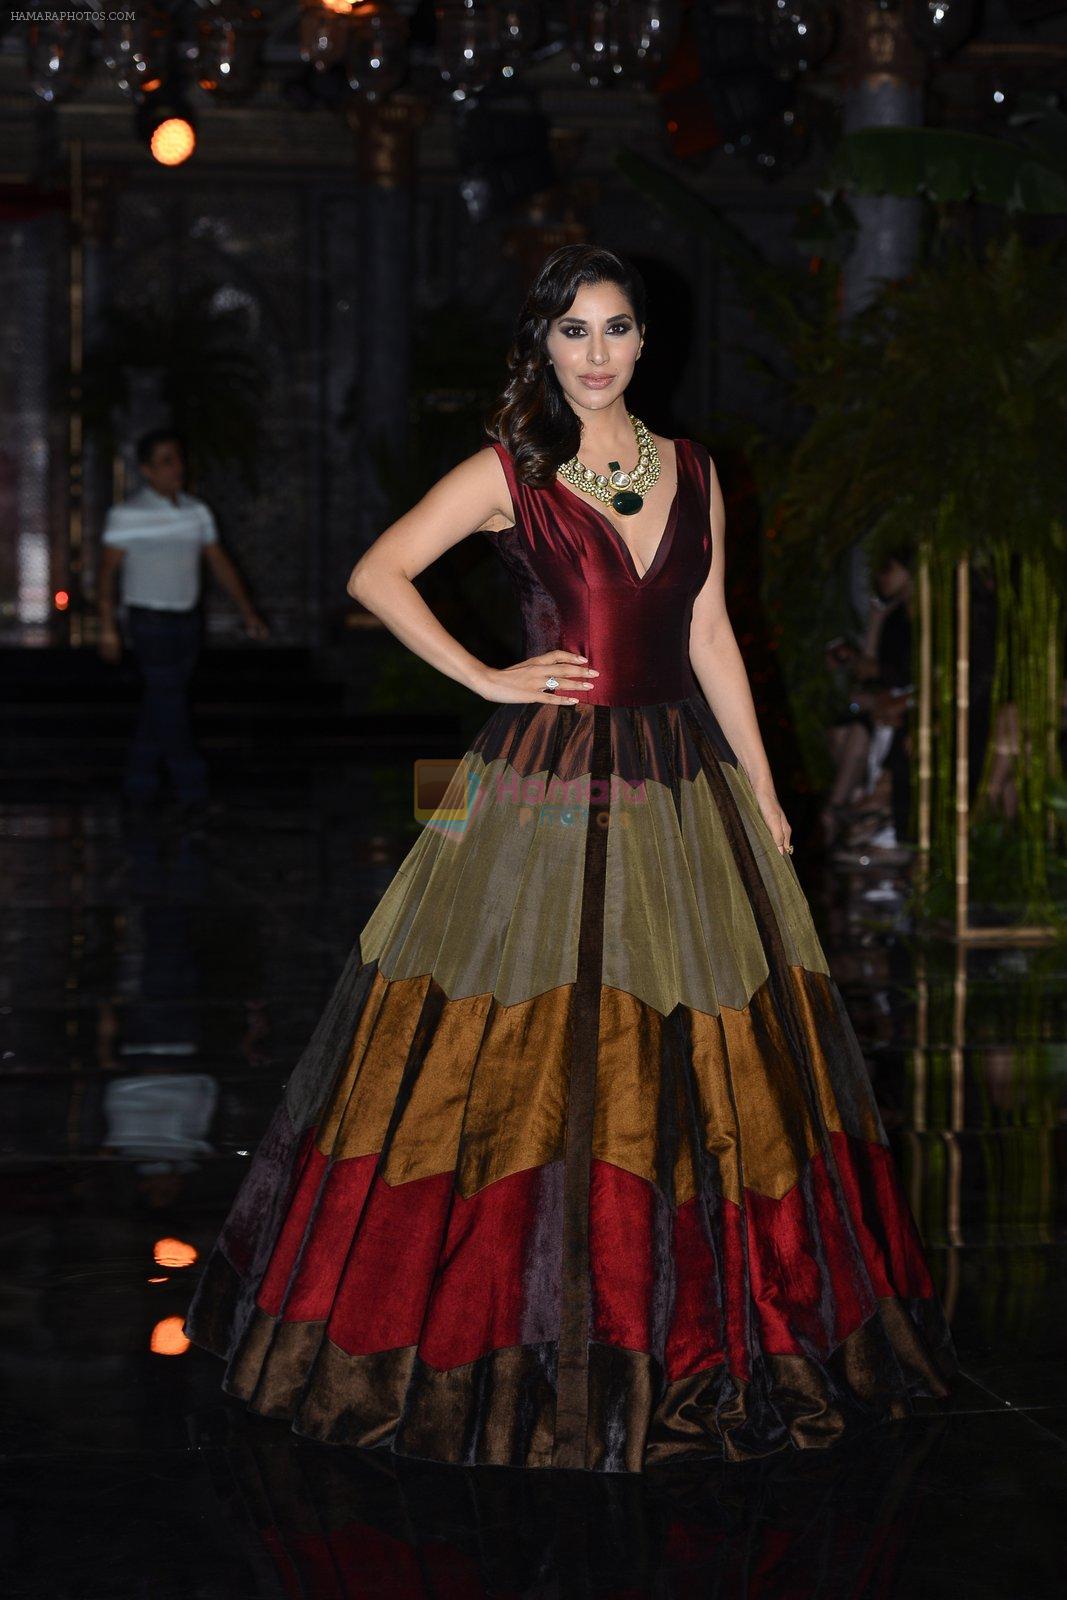 Sophie Chaudhary during the FDCI India Couture Week 2016 at the Taj Palace on July 21, 2016